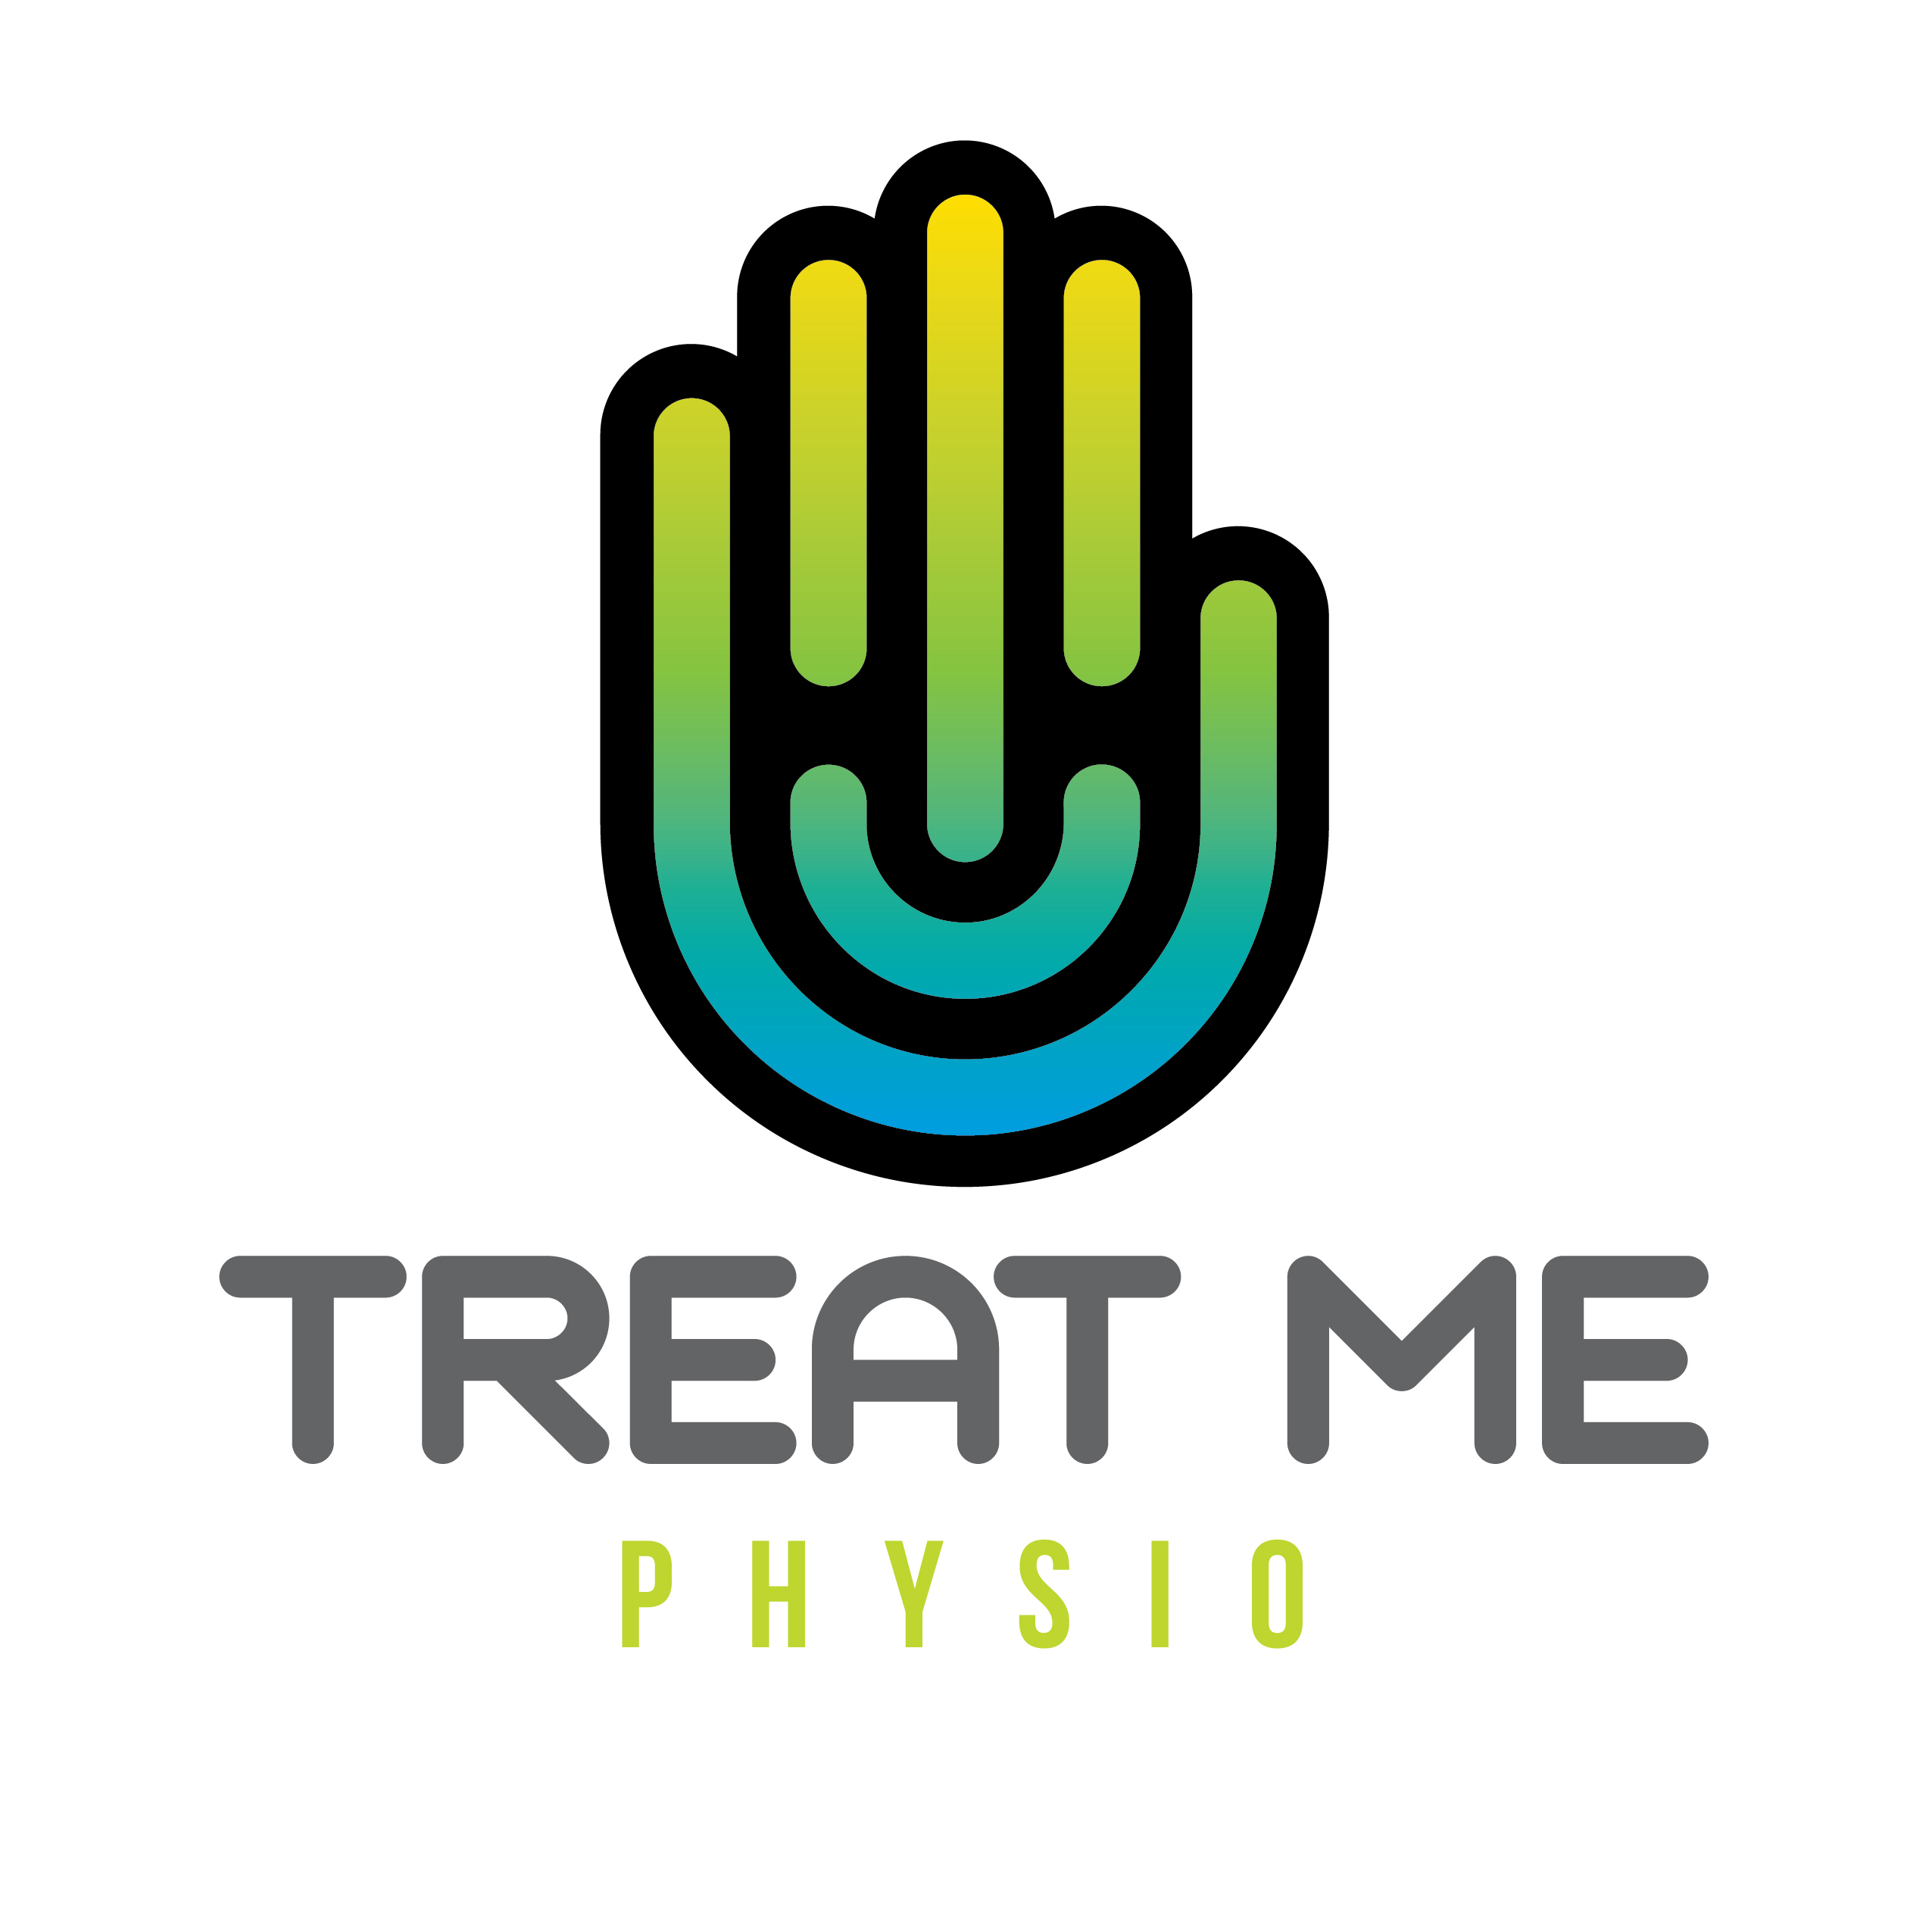 TreatMe Physio logo design by logo designer Yellow Pencil Brand Sharpening for your inspiration and for the worlds largest logo competition